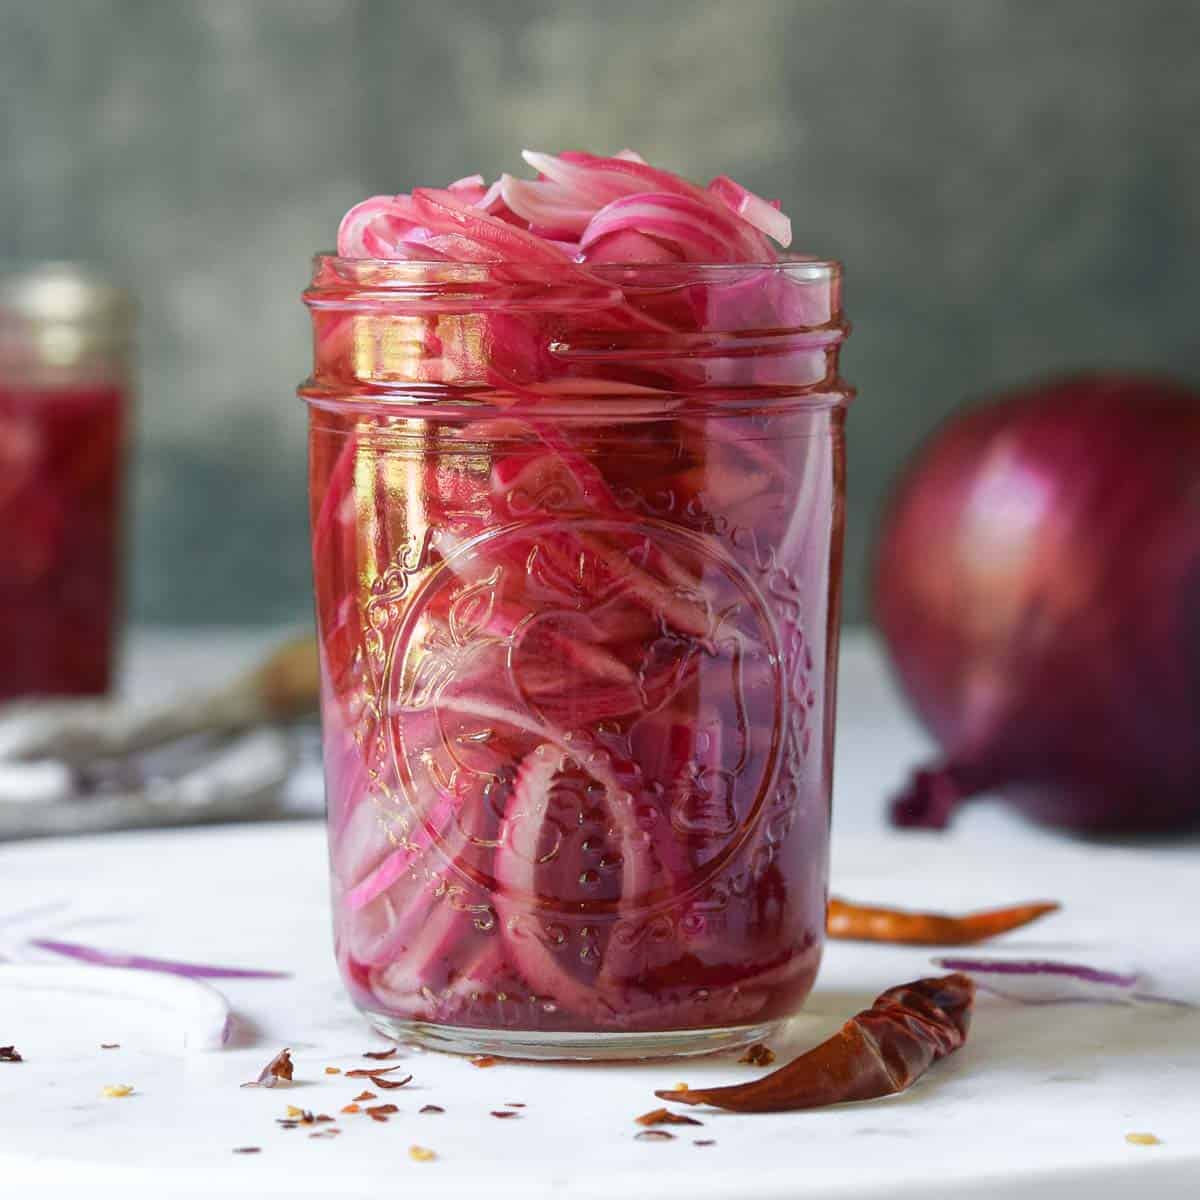 https://brunchandbatter.com/wp-content/uploads/2021/05/sweet-and-spicy-pickled-onions-featured.jpg